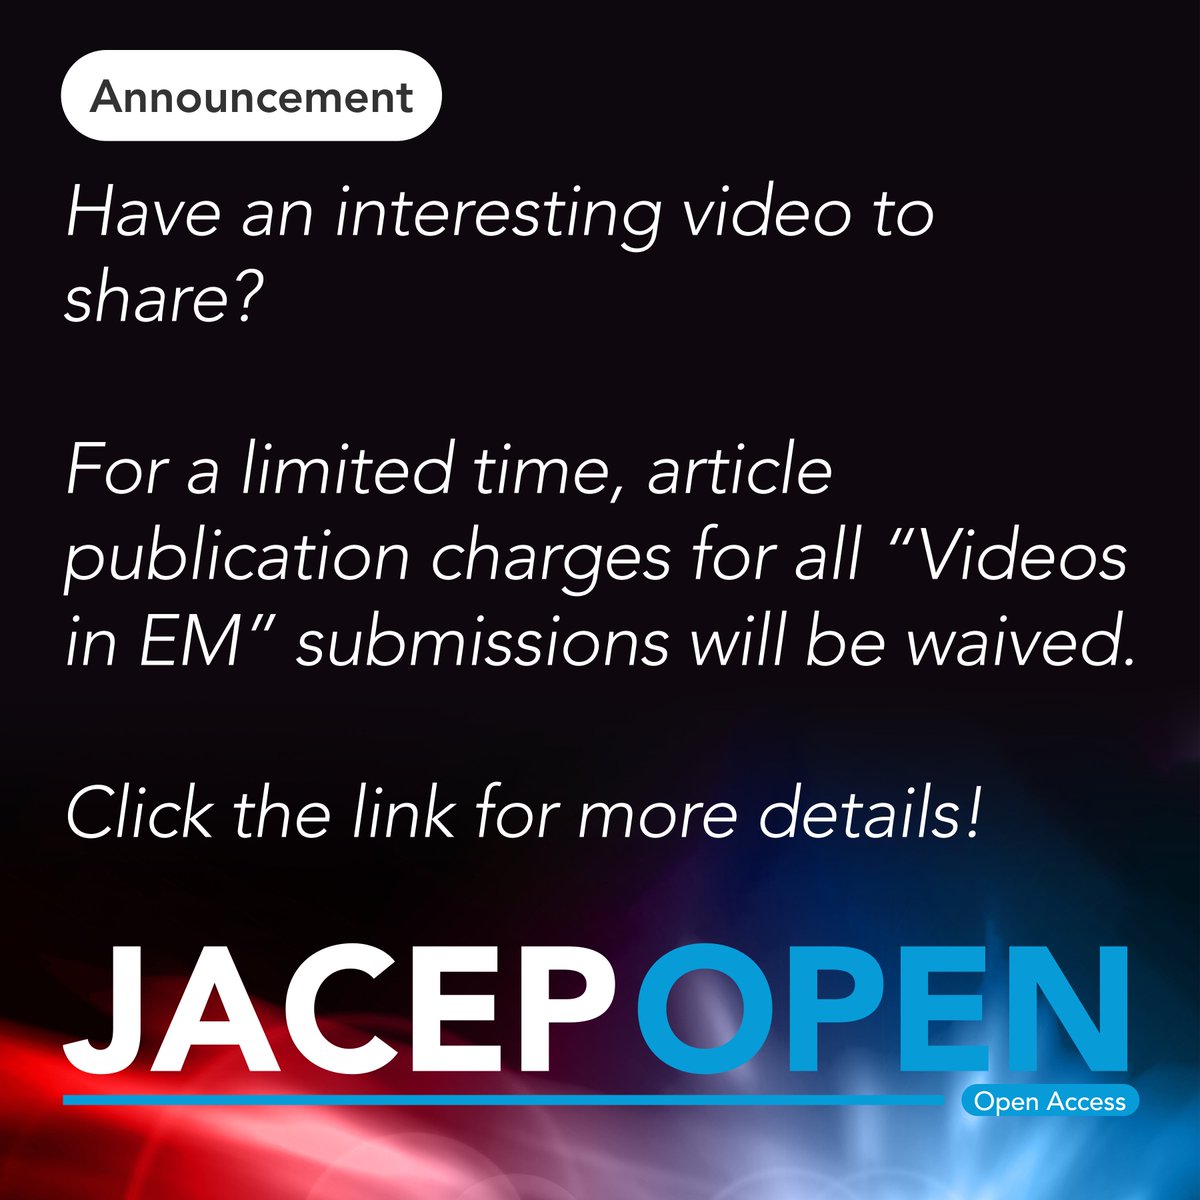 ATTENTION AUTHORS: For a limited time, article publication charges for all “Videos in EM” submissions will be WAIVED. Submit your videos NOW!! Learn more here: buff.ly/2EENOQc @EmergencyDocs, @ACEPNow, @WileyHealth, @wileyinresearch